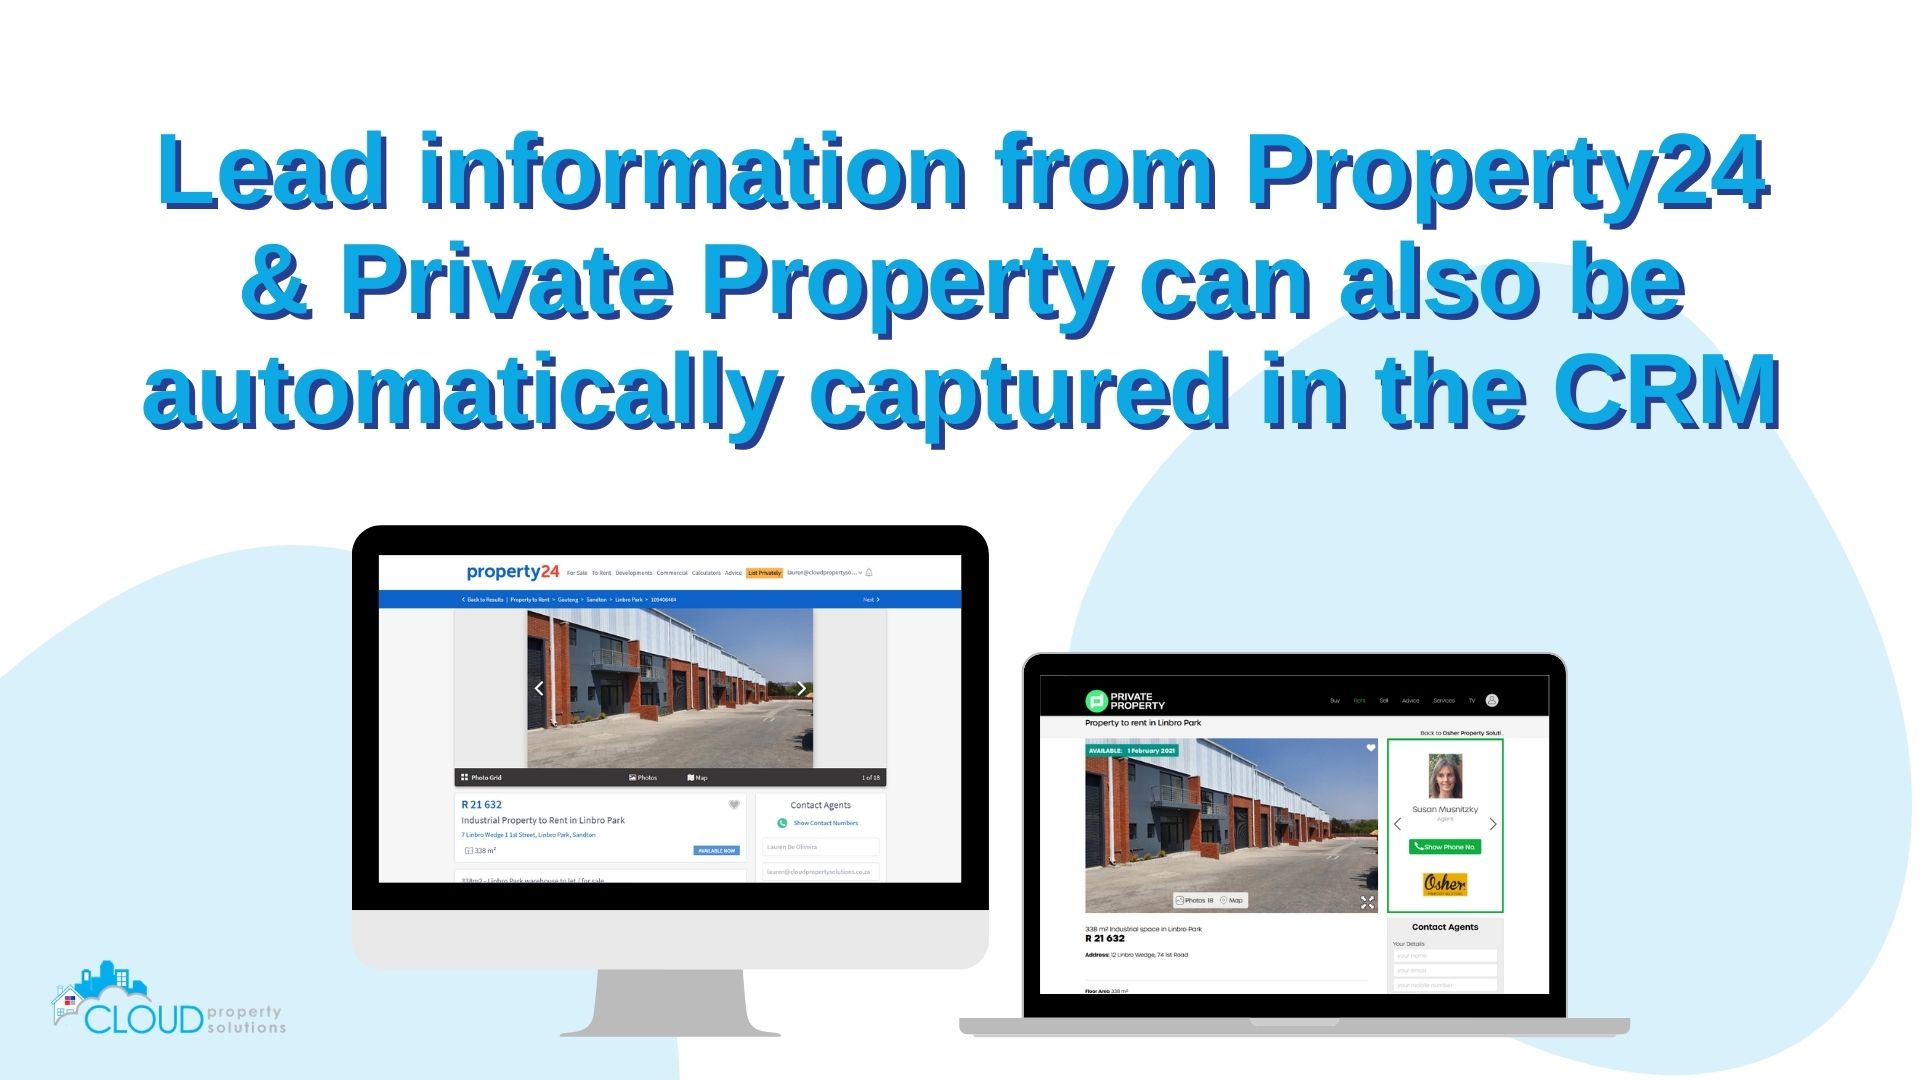 Lead information is captured in the CRM from Property24 and Private Property.